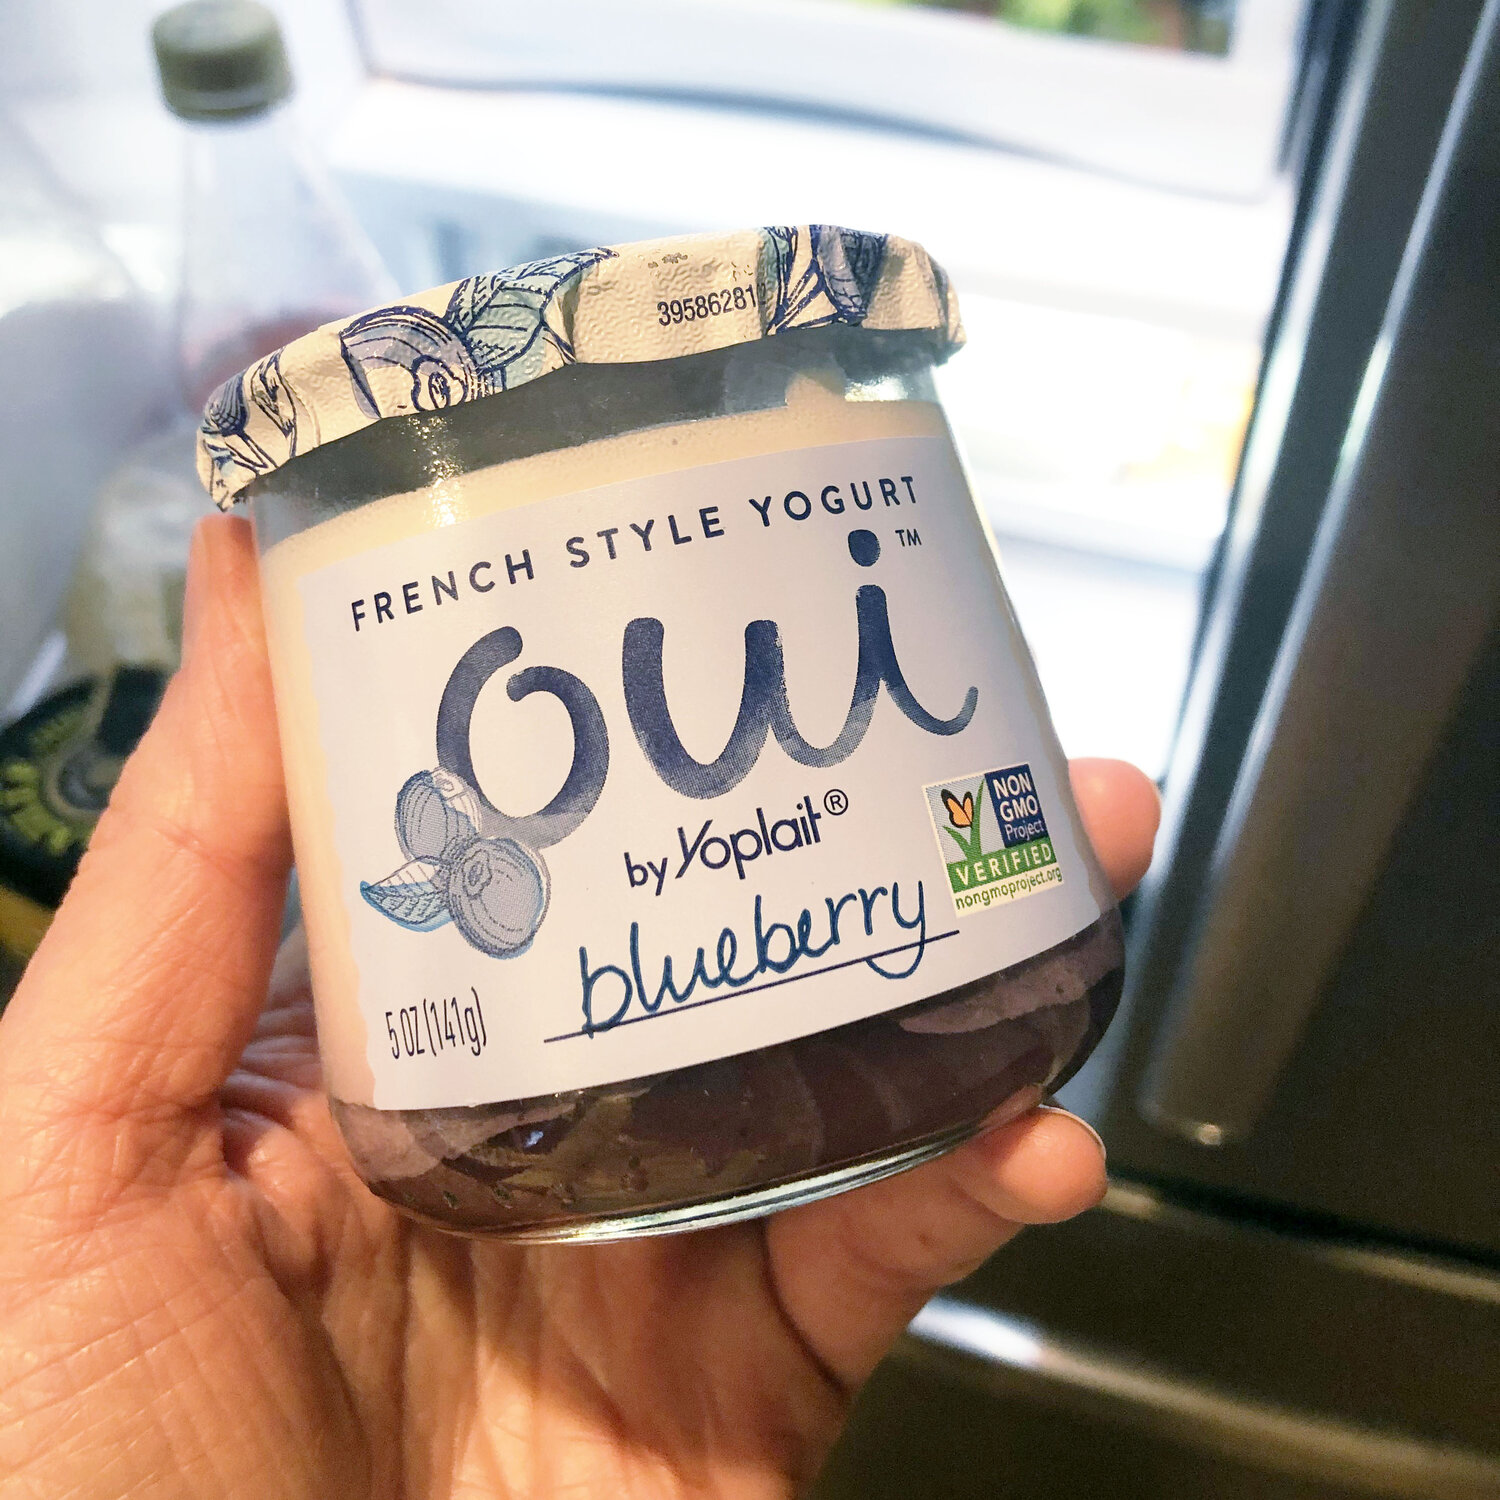 These yogurts in glass containers are perfect for up-cycling! (and they’re delicious)